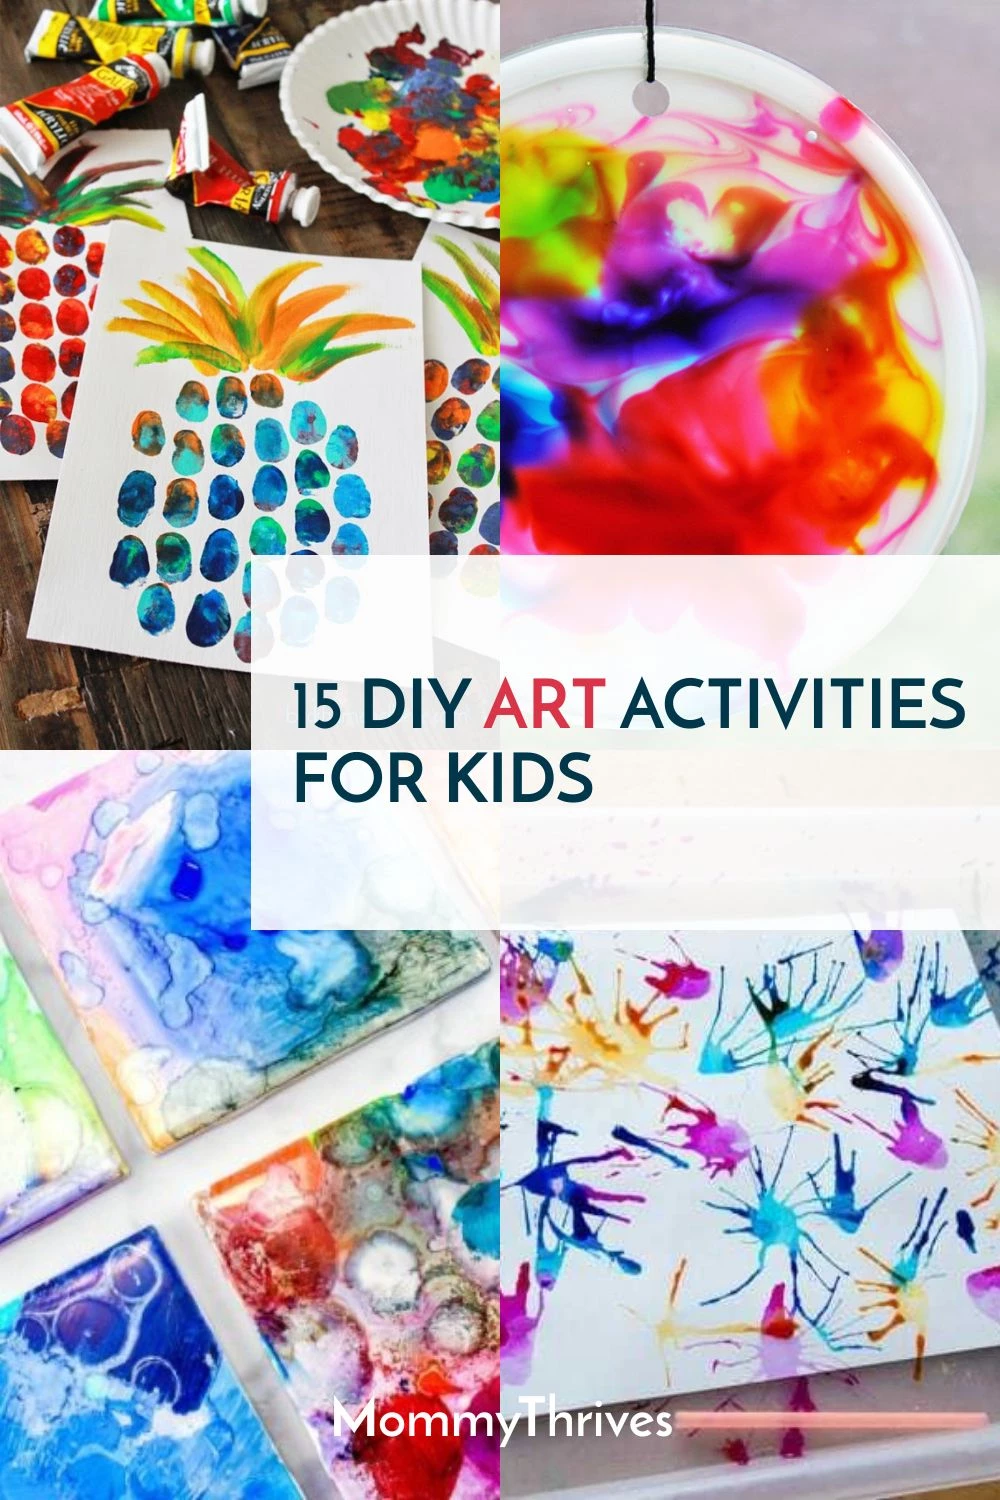 18 Craft Ideas For Kids - MommyThrives